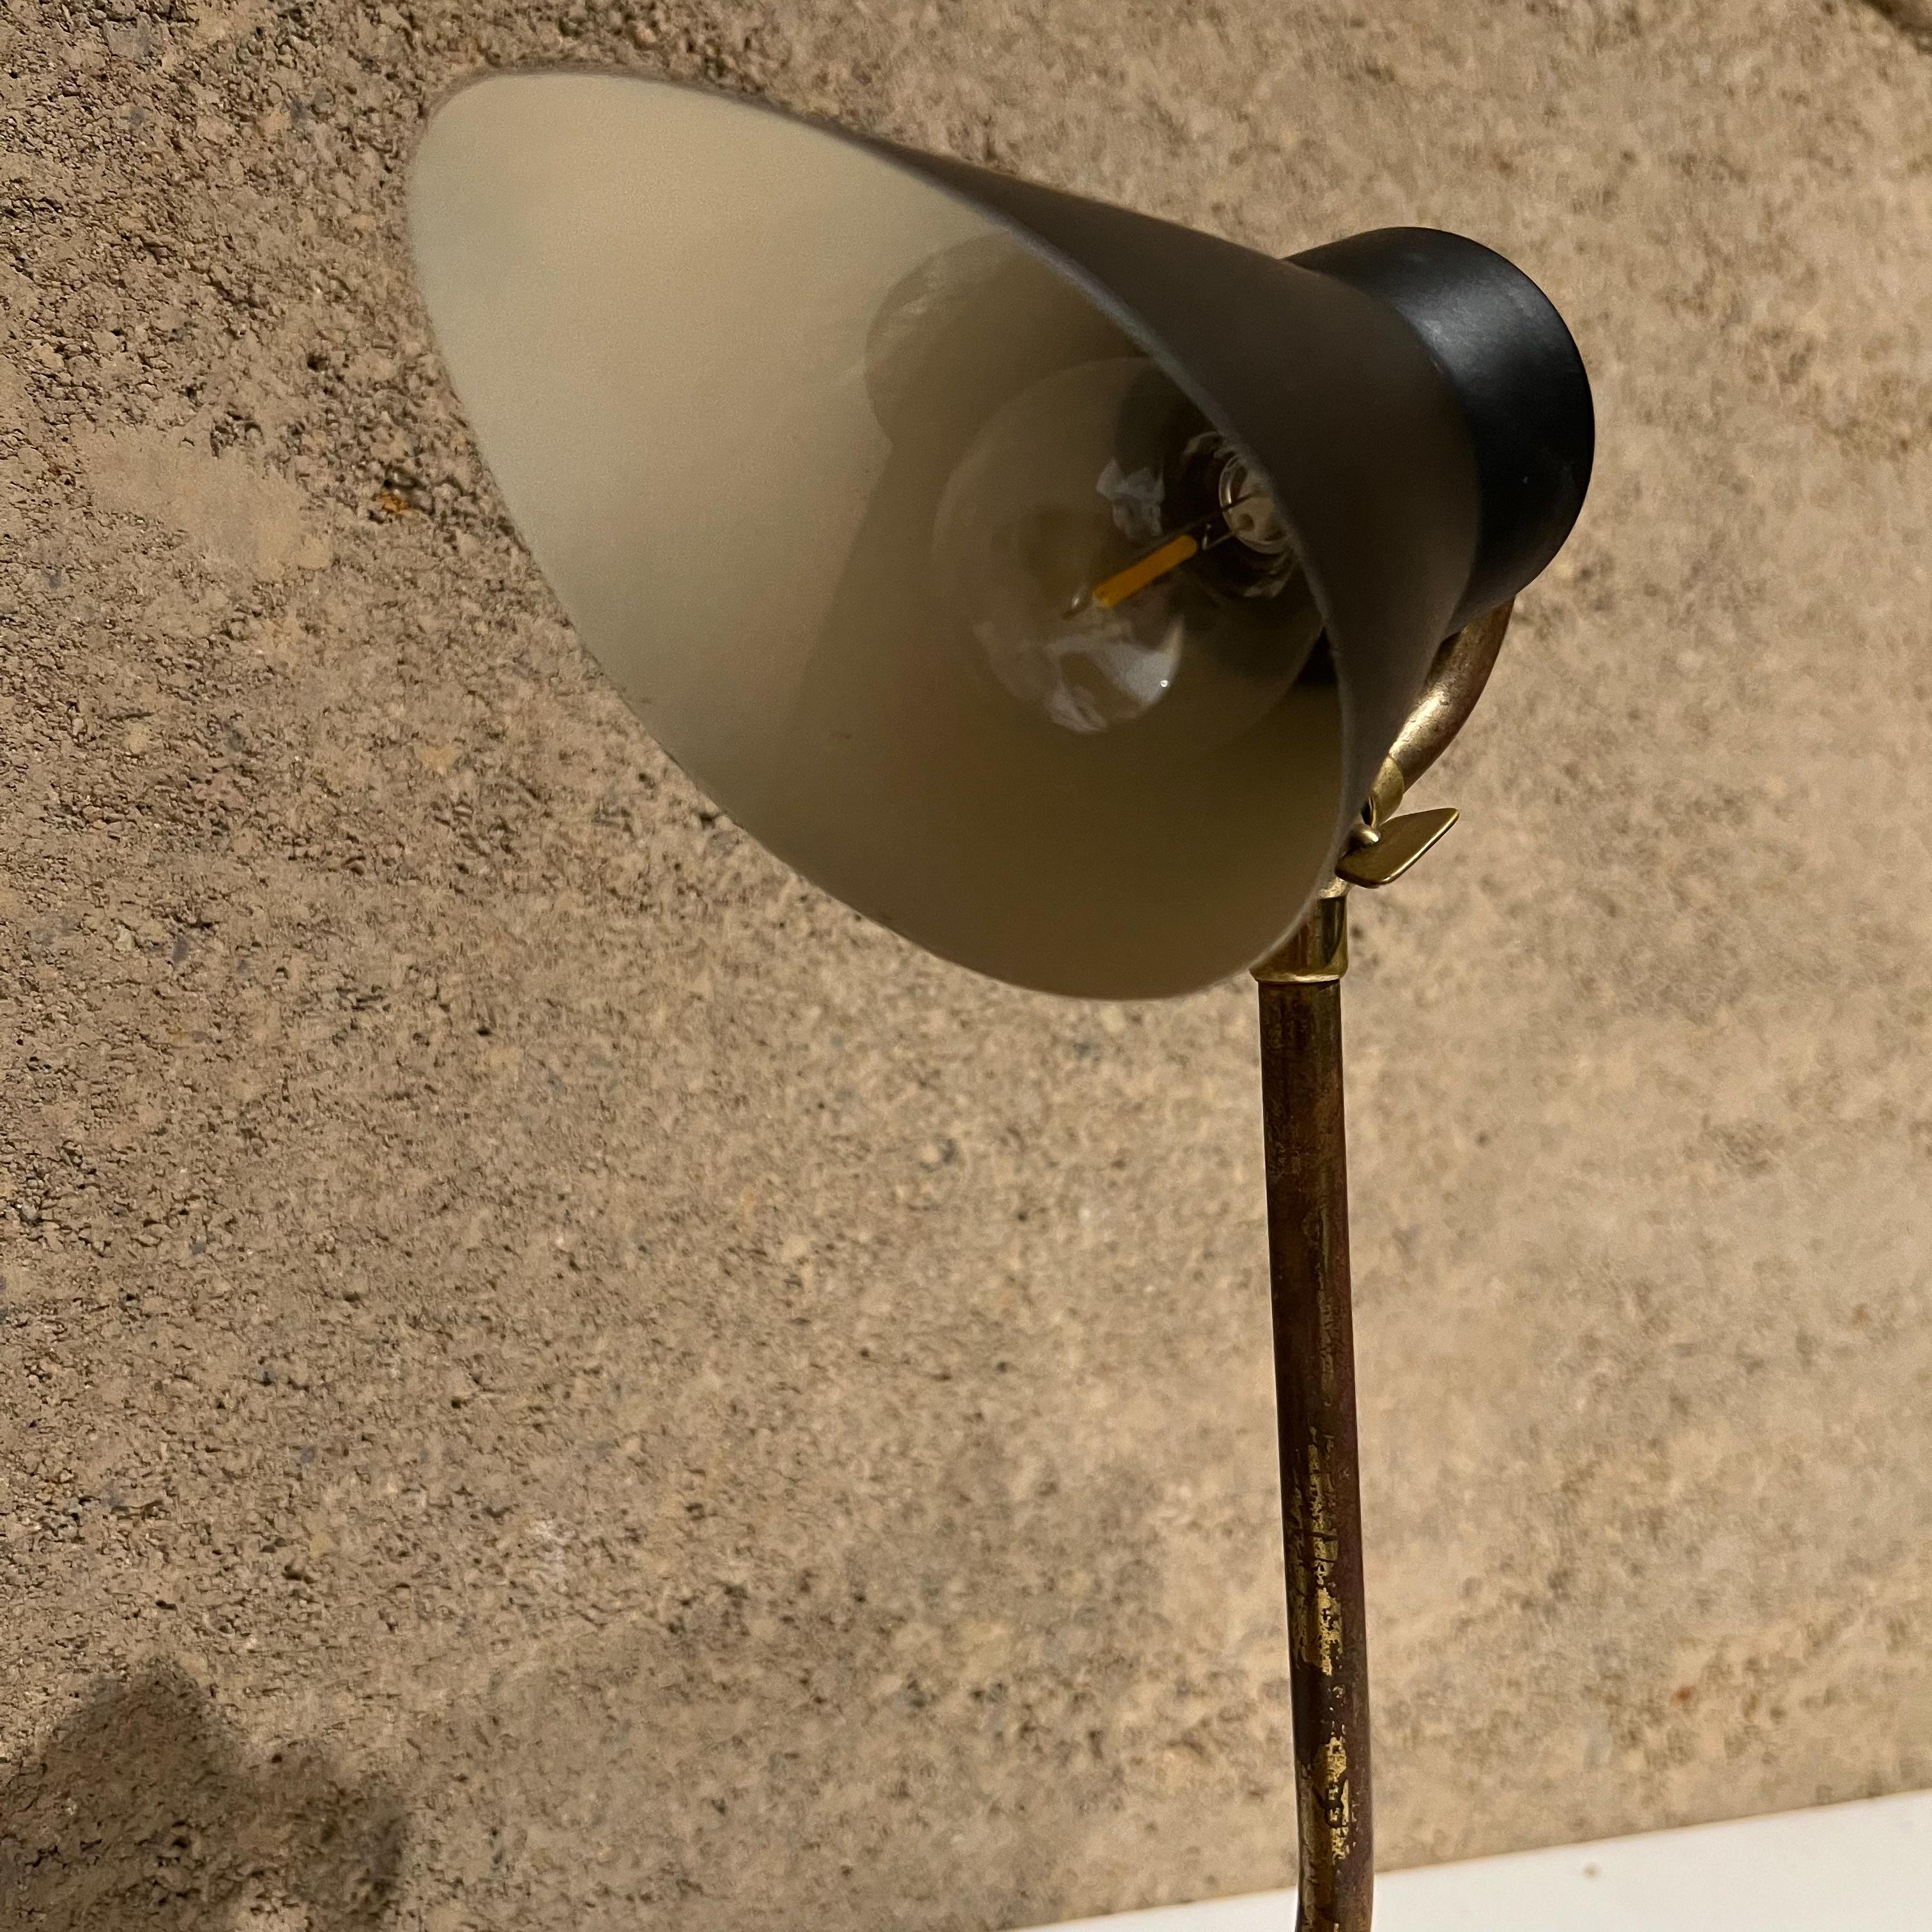 1950s table lamp modern sculptural task desk light in brass and black
Unmarked
Measures: 10.5 tall x 3.75 width x 9 depth
Task or desk lamp in brass with aluminum shade painted black
Preowned vintage condition, rewired. Tested and working
Refer